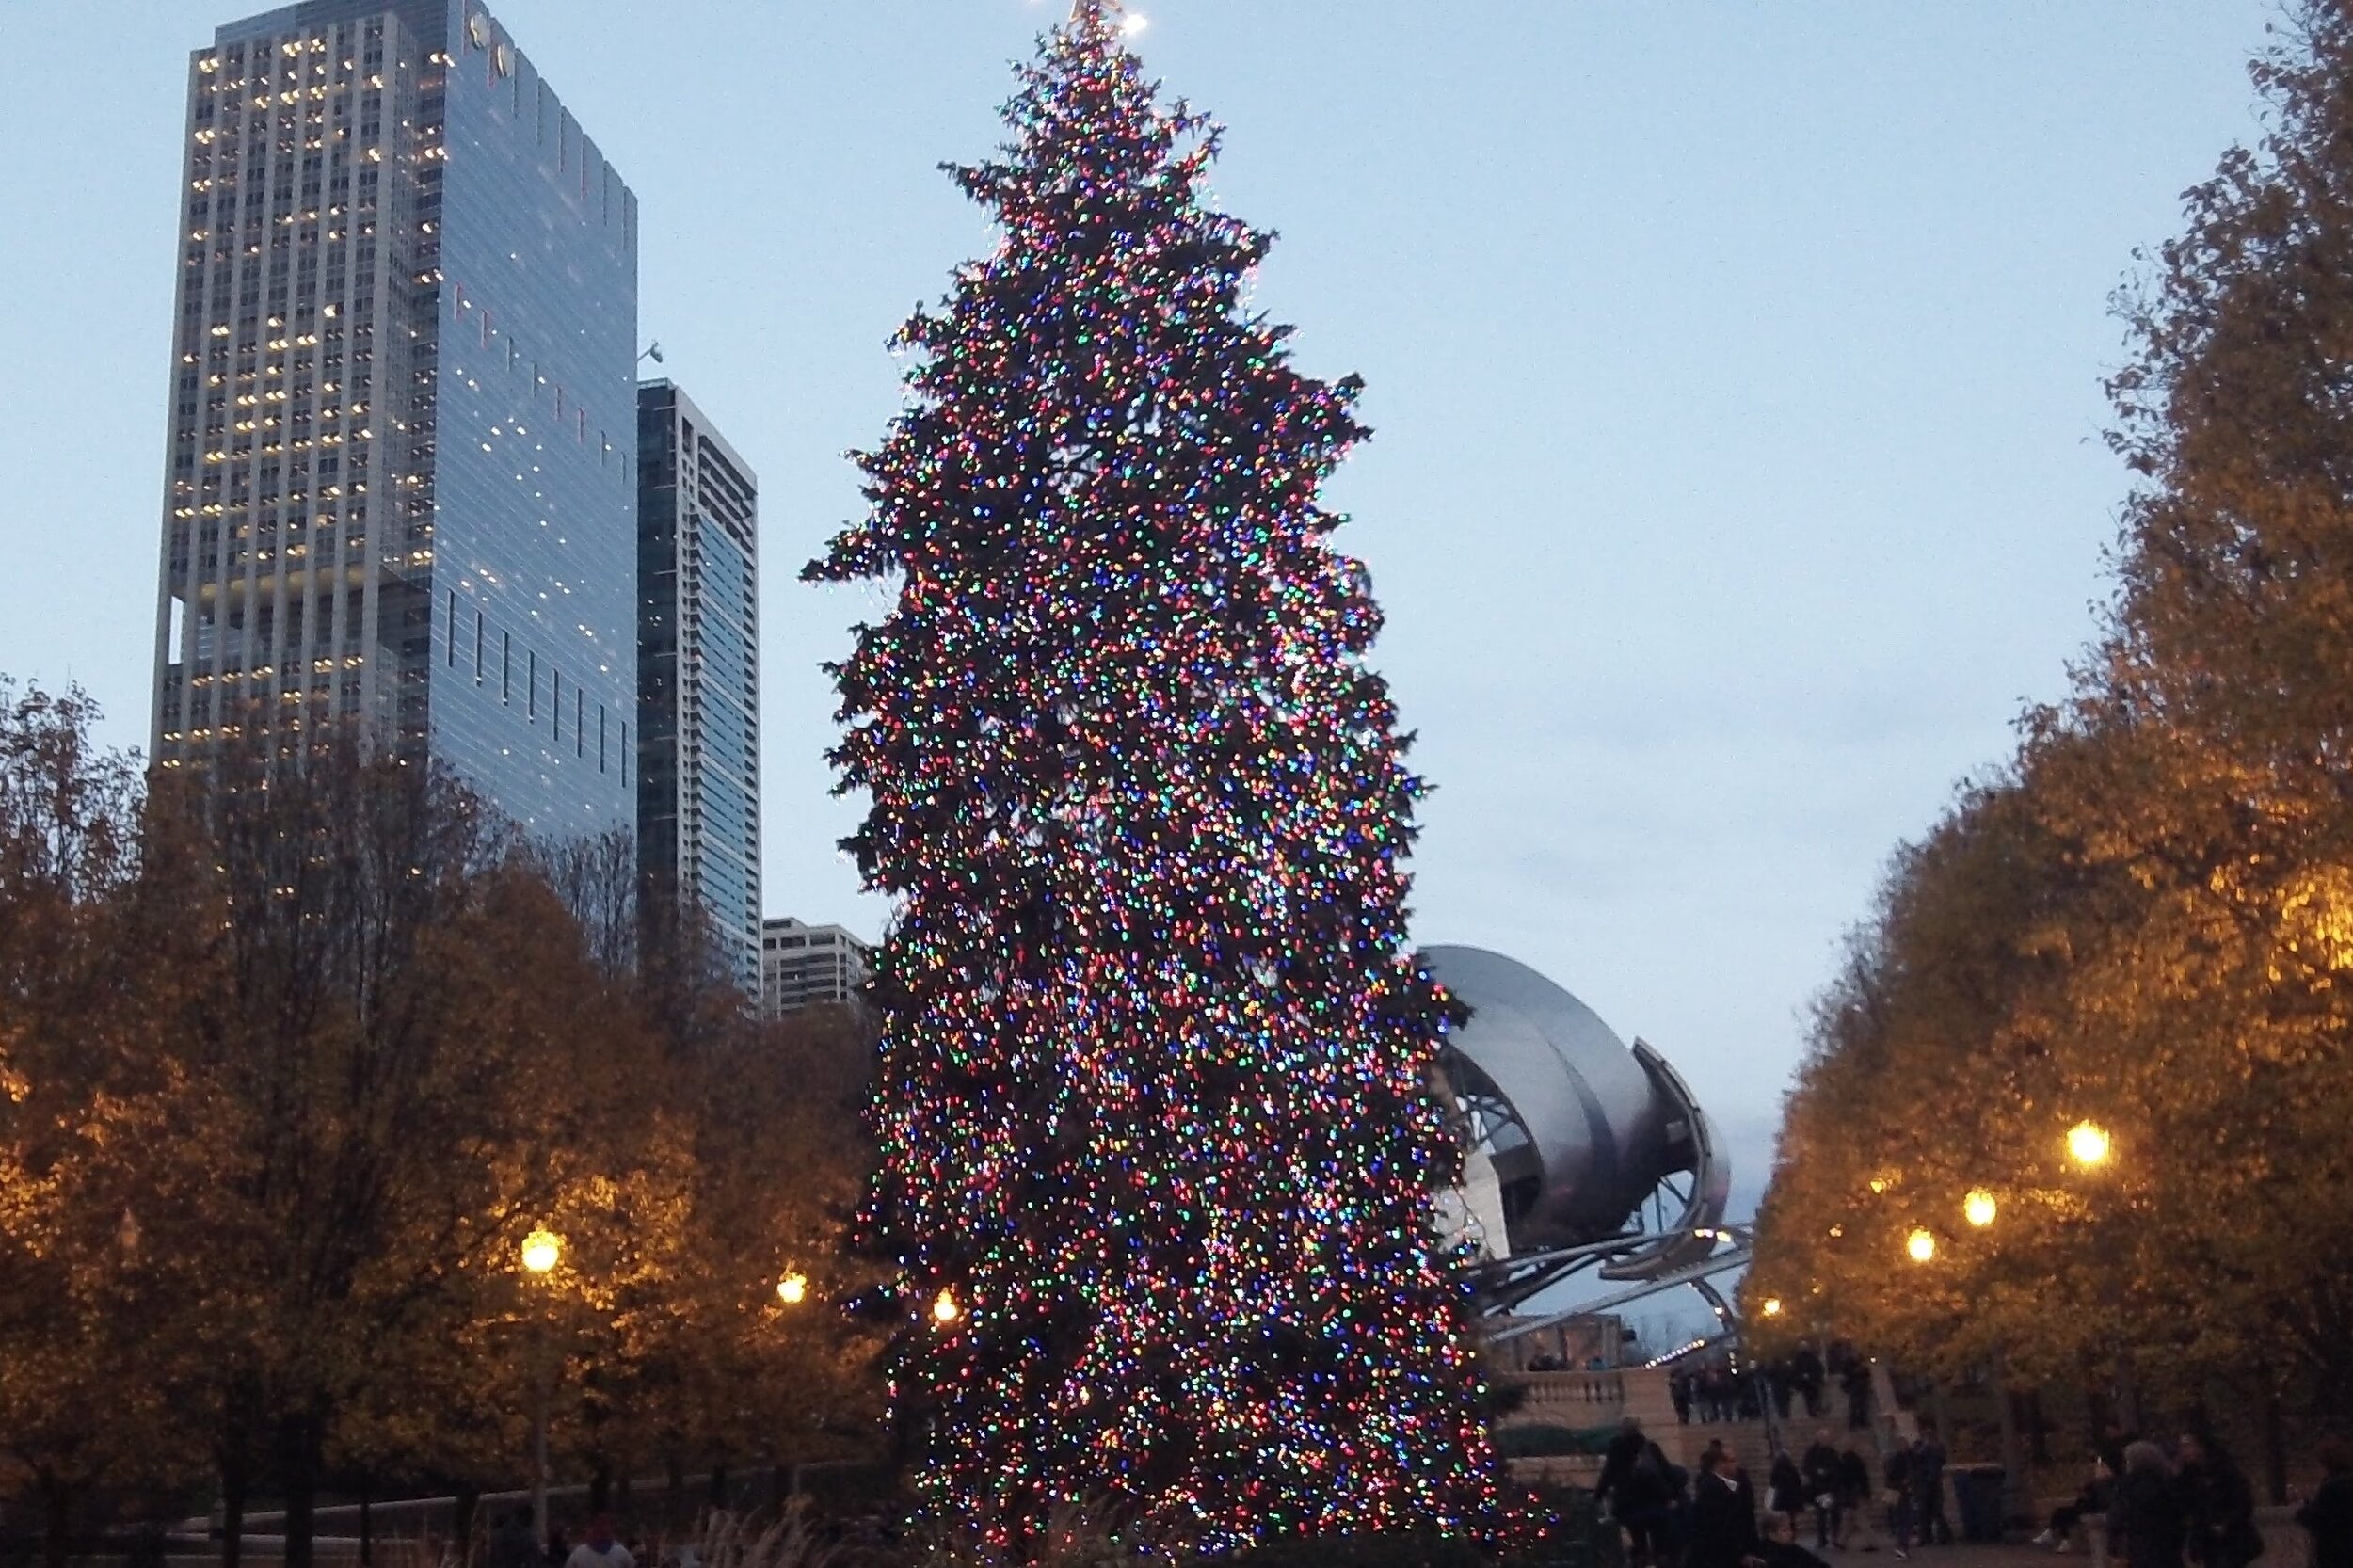 <span style="font-weight:bold"><p style="font-size:20px">Millennium Park Christmas Tree</p></span>Chicago, Illinois